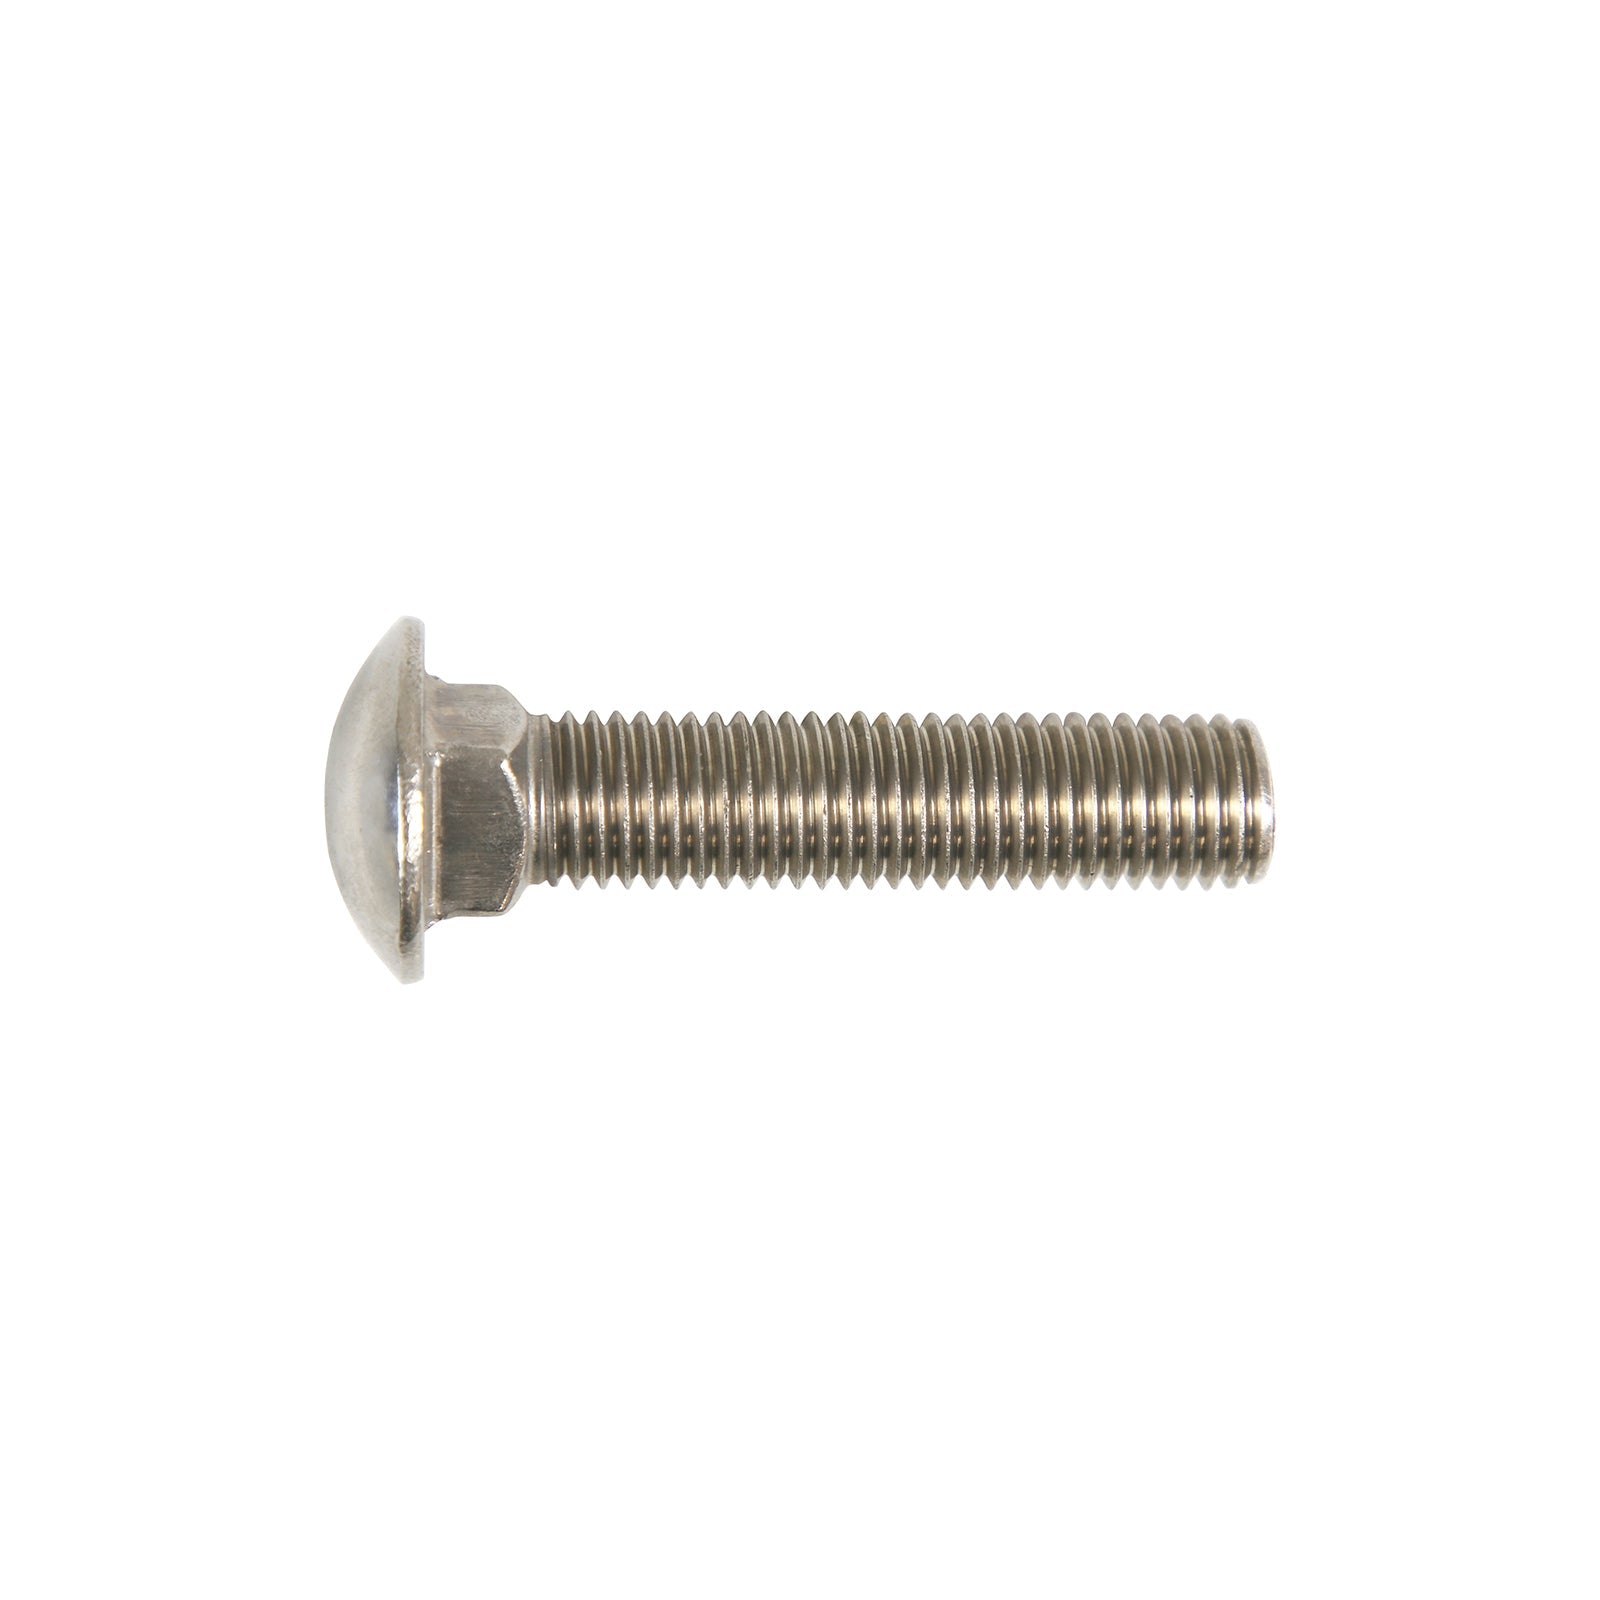 3/4"-10 x 3-1/2" Conquest Carriage Bolt - 304 Stainless Steel